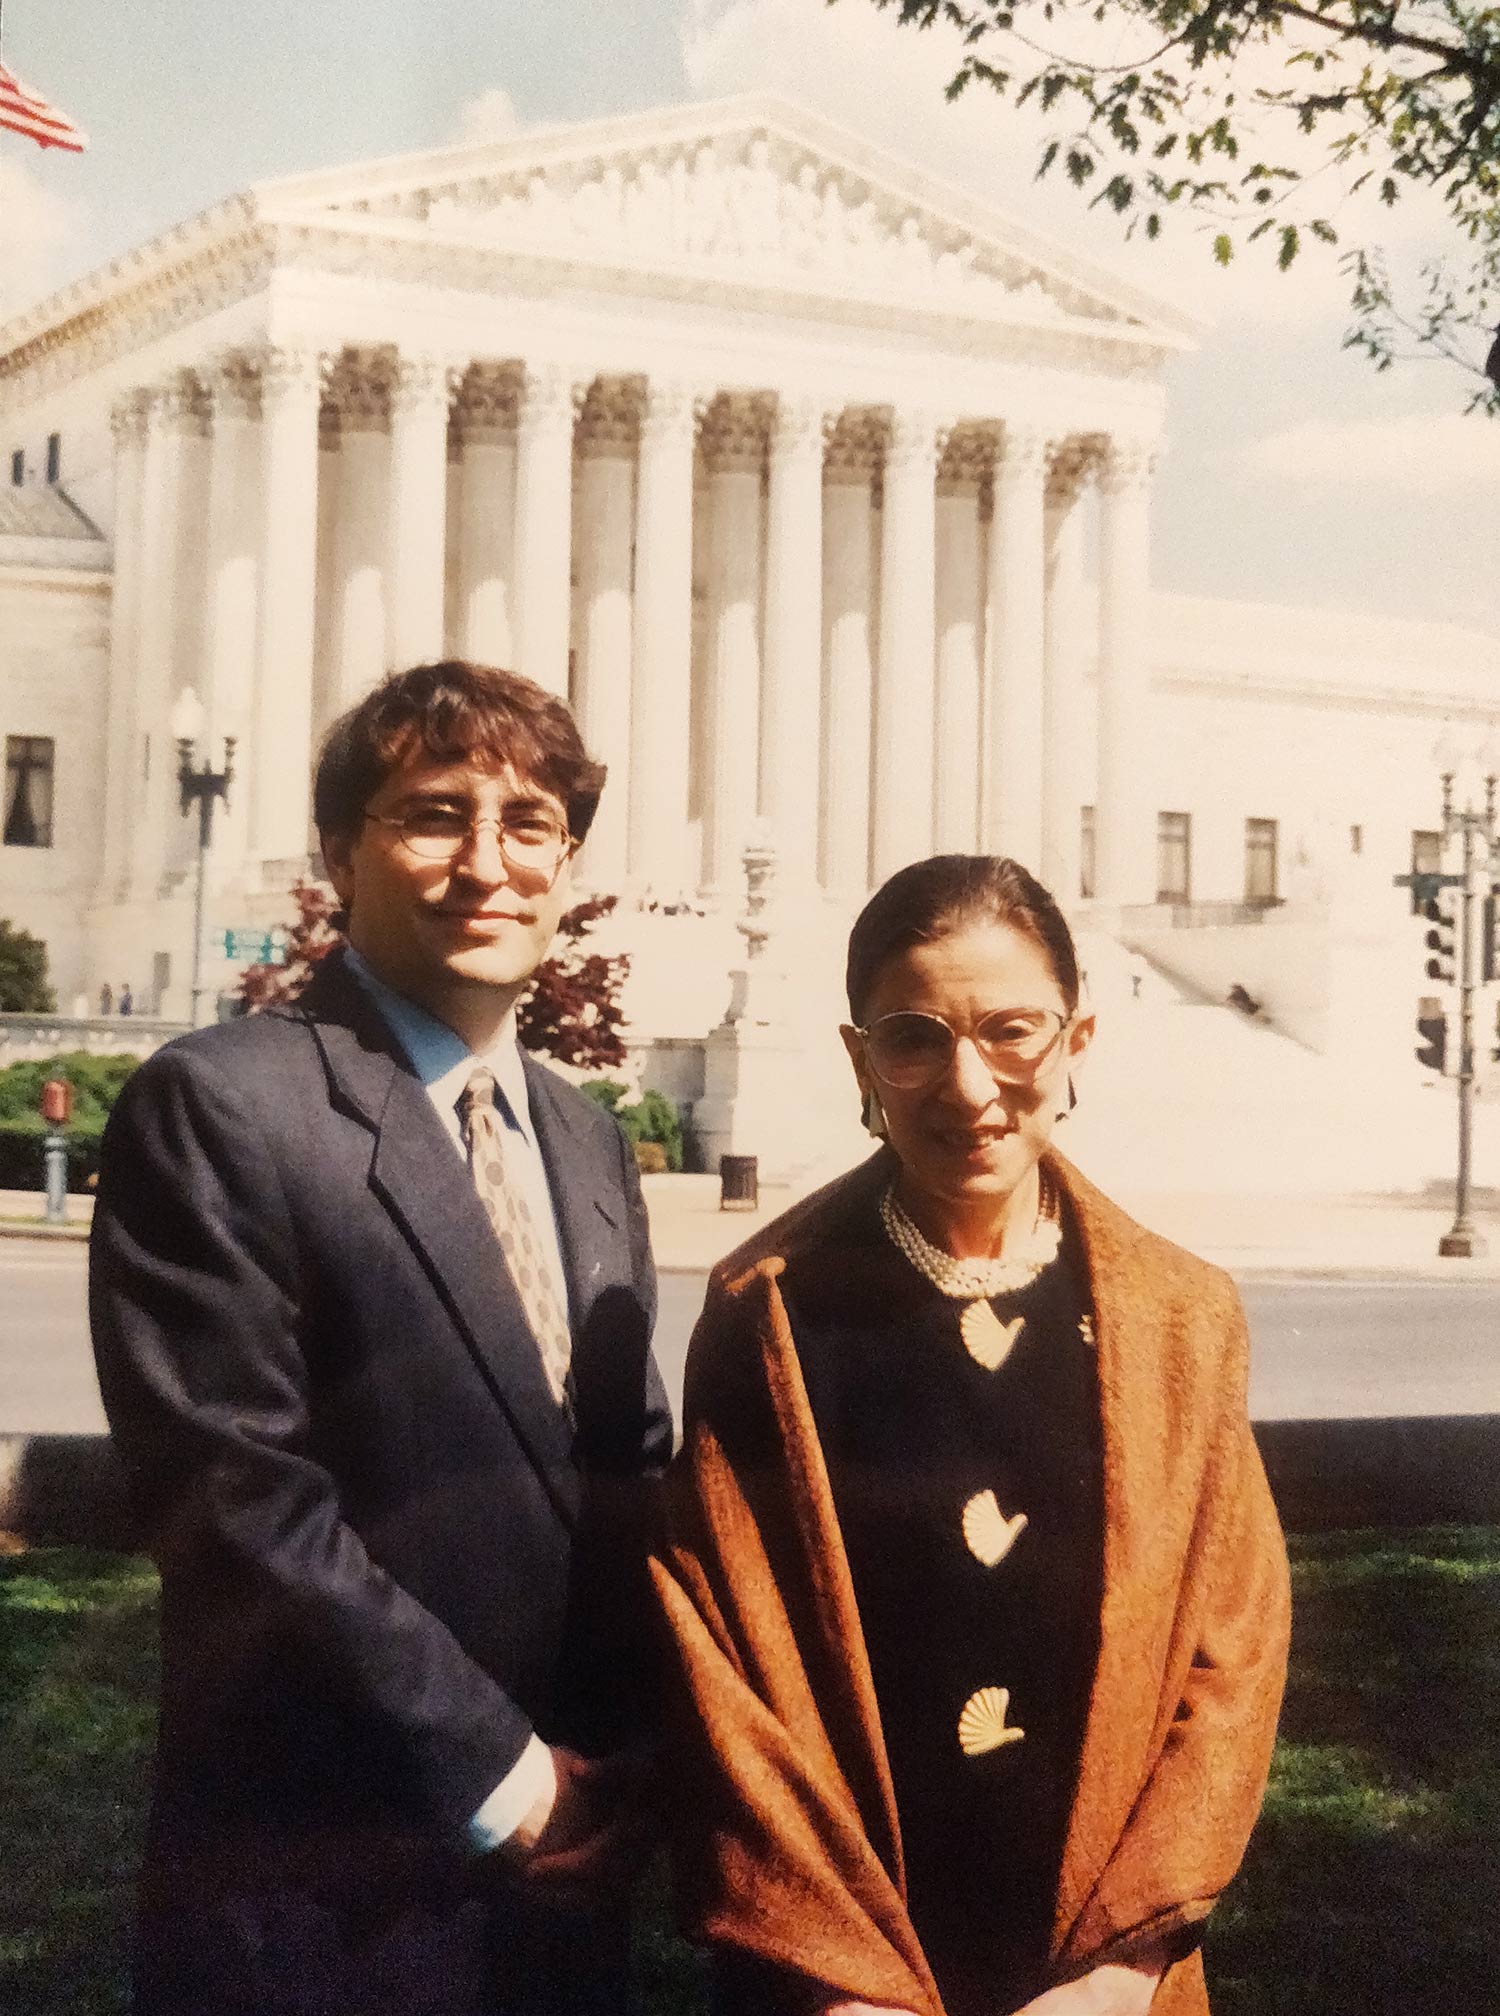 Jay Wexler and Ruth Bader Ginsberg outside the Supreme Court